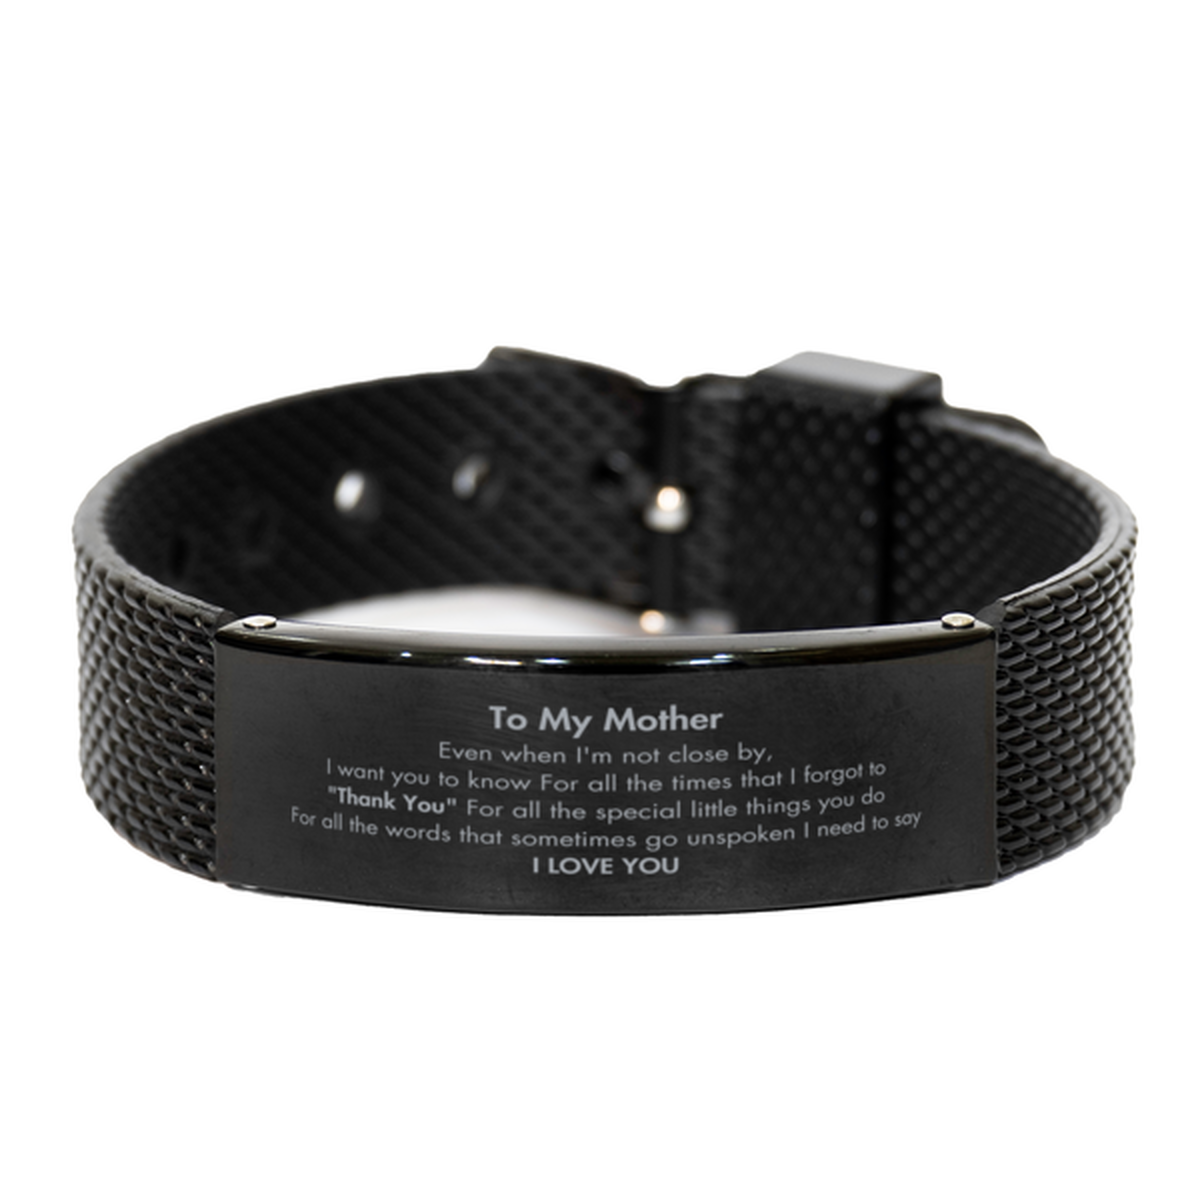 Thank You Gifts for Mother, Keepsake Black Shark Mesh Bracelet Gifts for Mother Birthday Mother's day Father's Day Mother For all the words That sometimes go unspoken I need to say I LOVE YOU